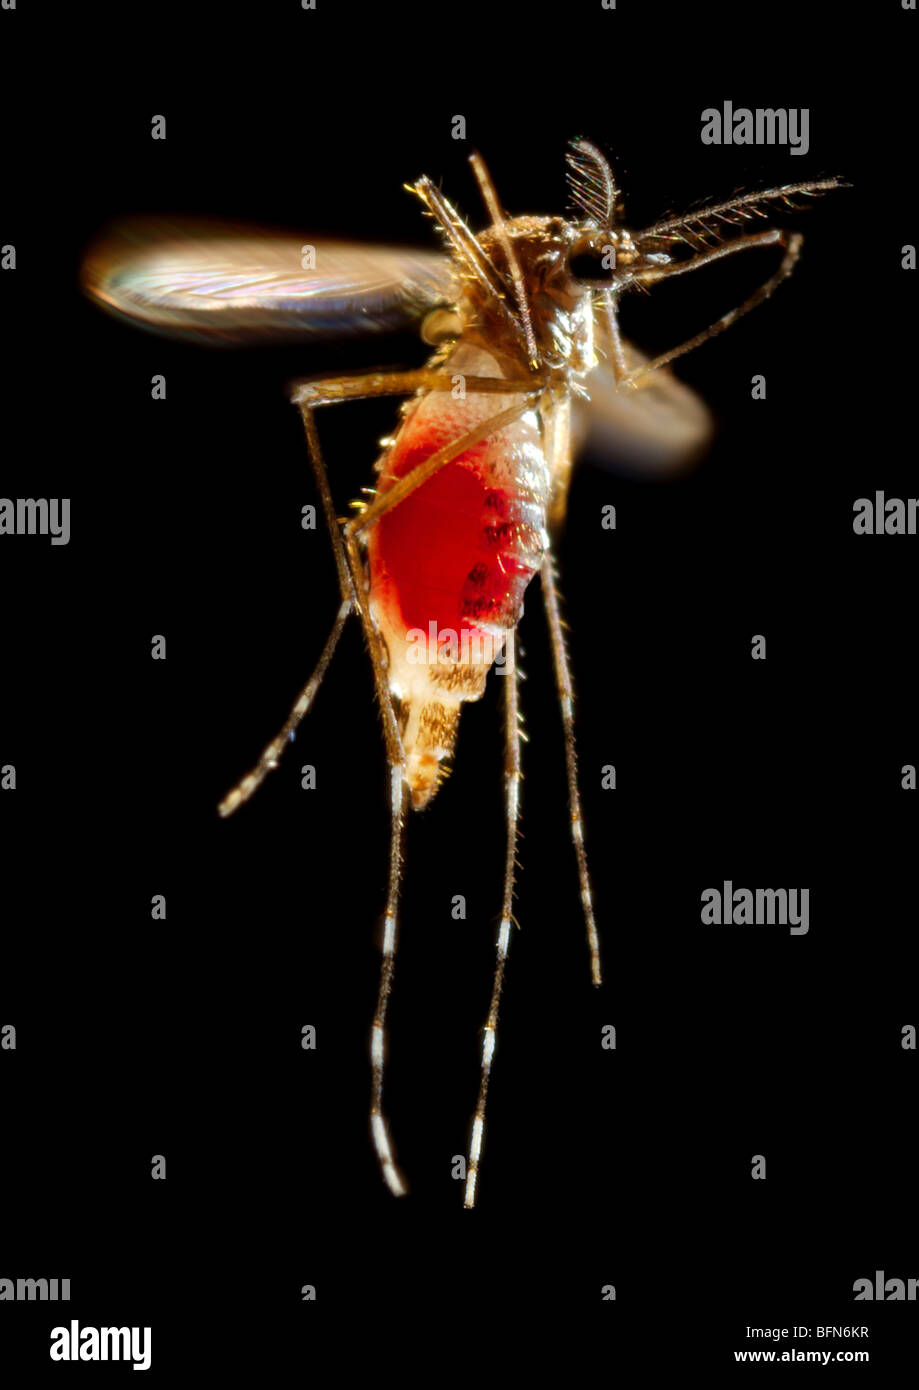 A female Aedes aegypti mosquito in flight with a newly-obtained blood meal visible through her  transparent abdomen Stock Photo